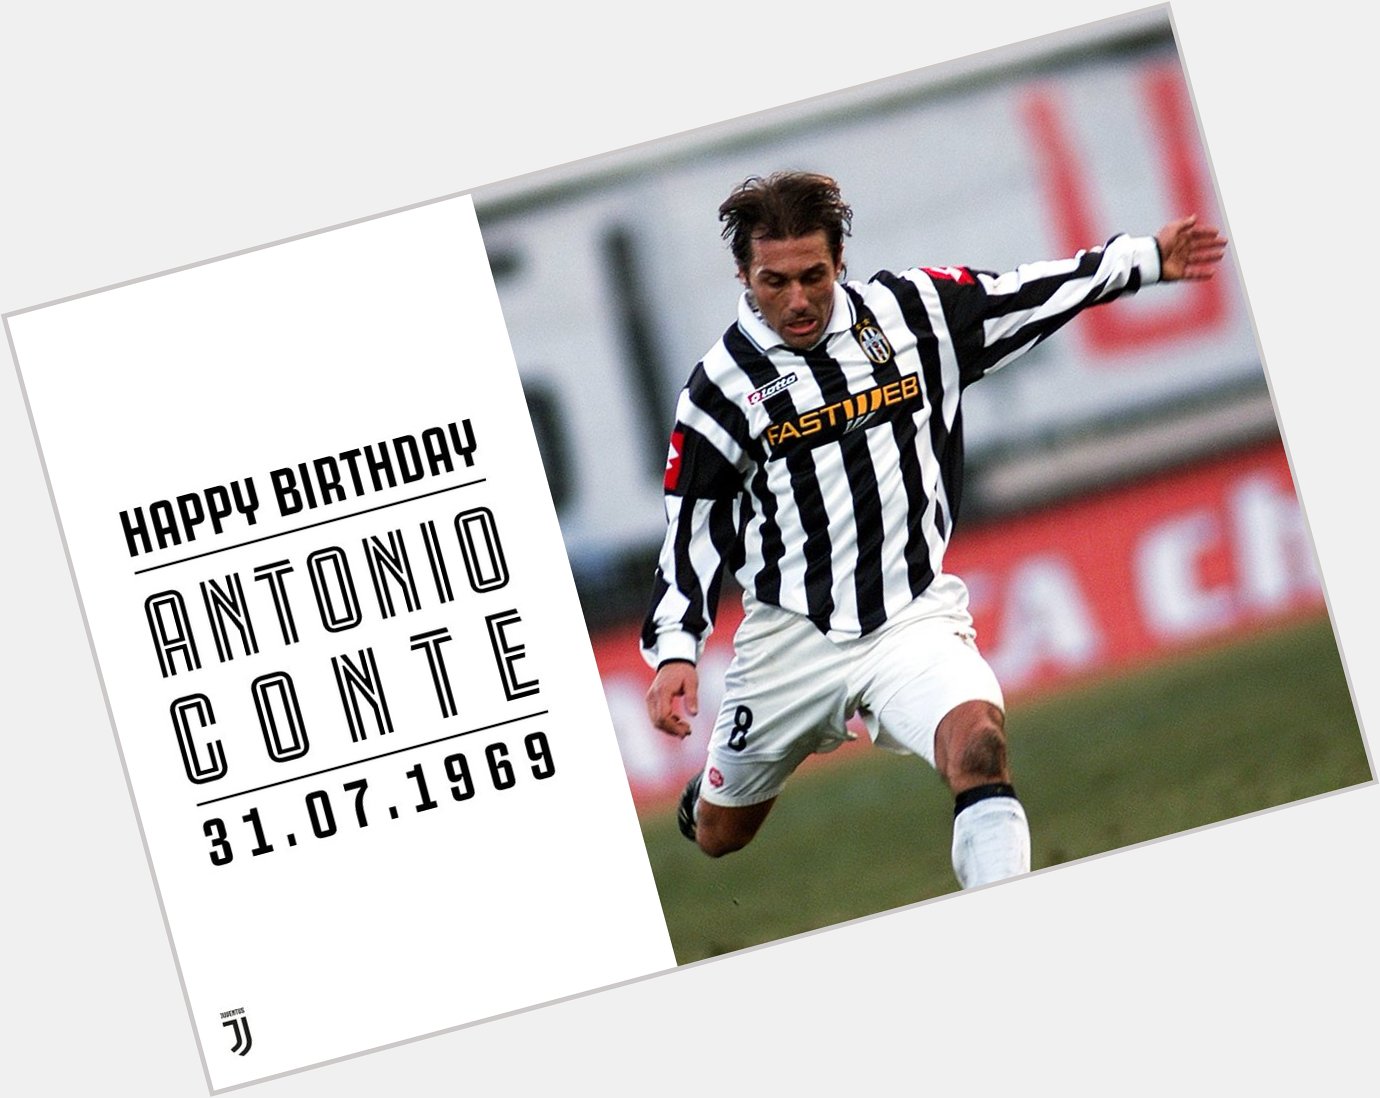 Happy birthday to a -winning player and coach, Antonio Conte!      